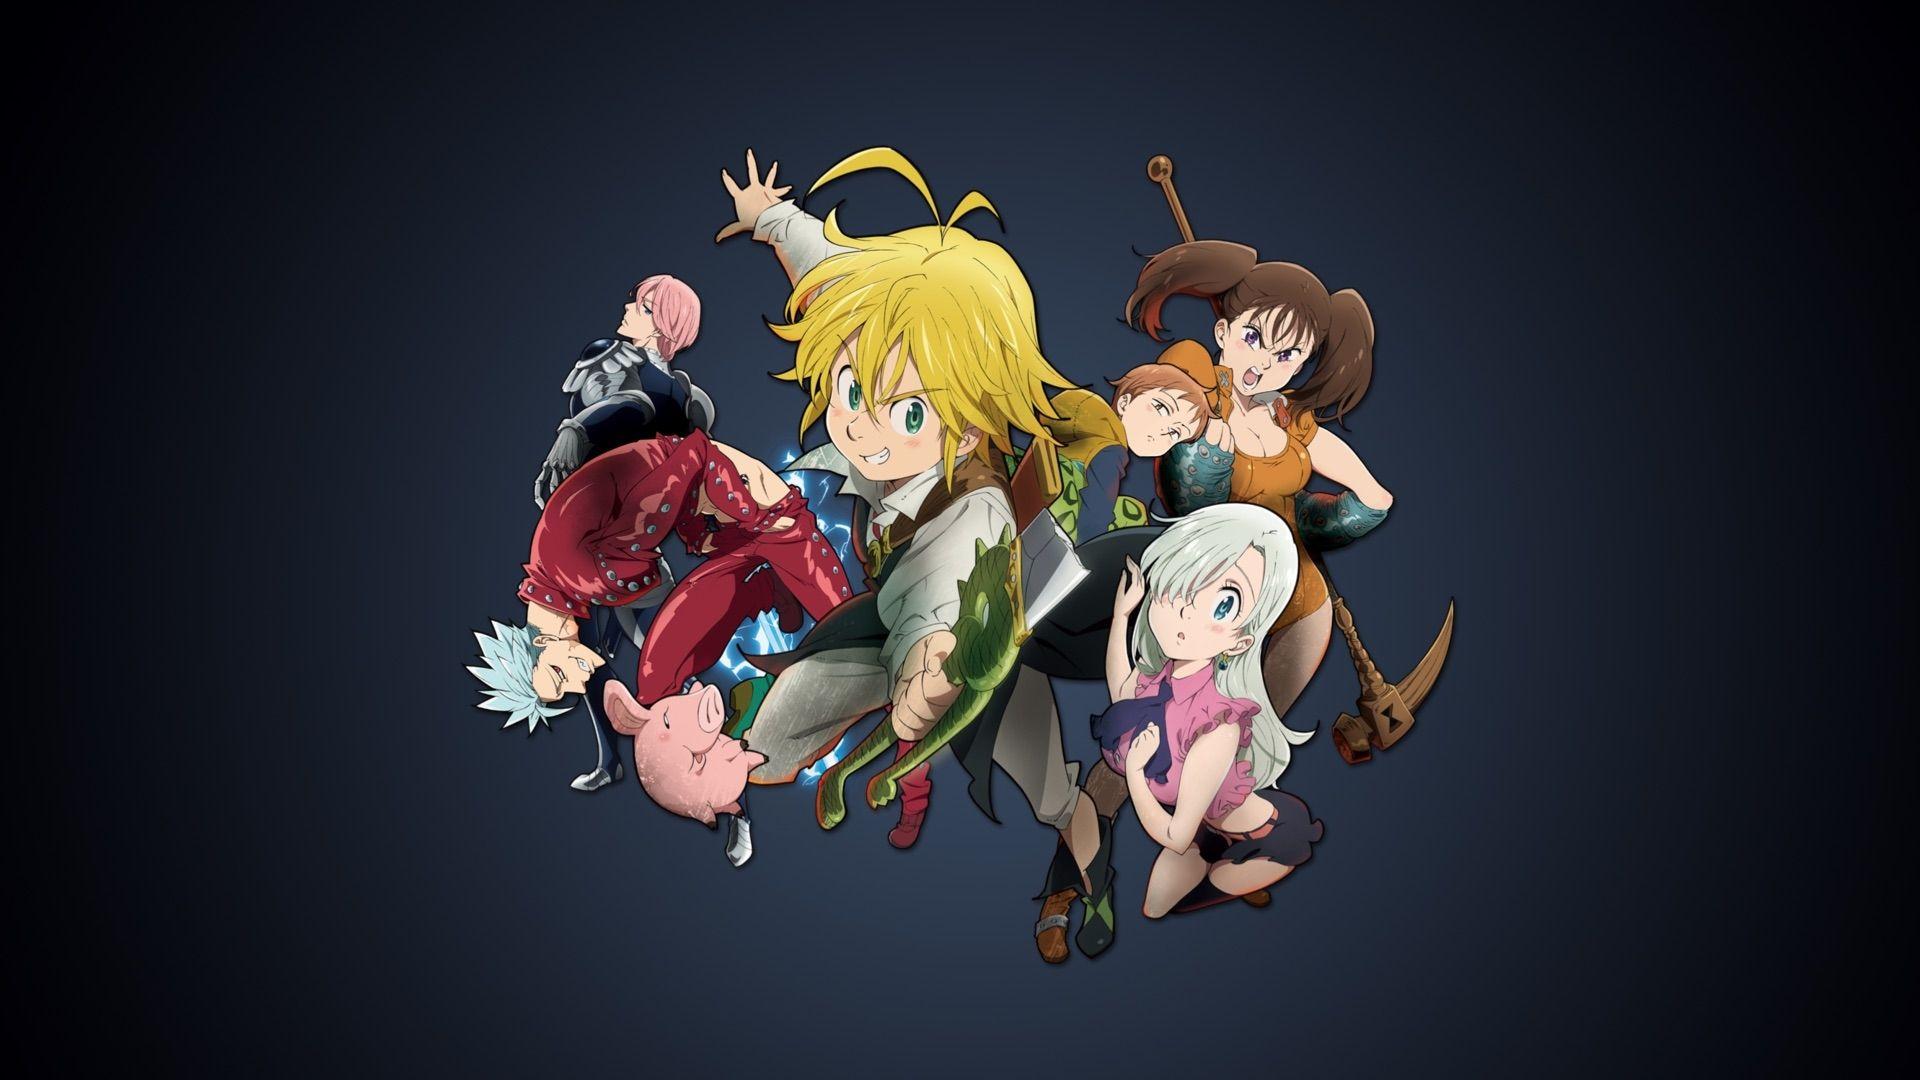 Deadly Sins Wallpaper, High Quality Pics of 7 Deadly Sins in Nice